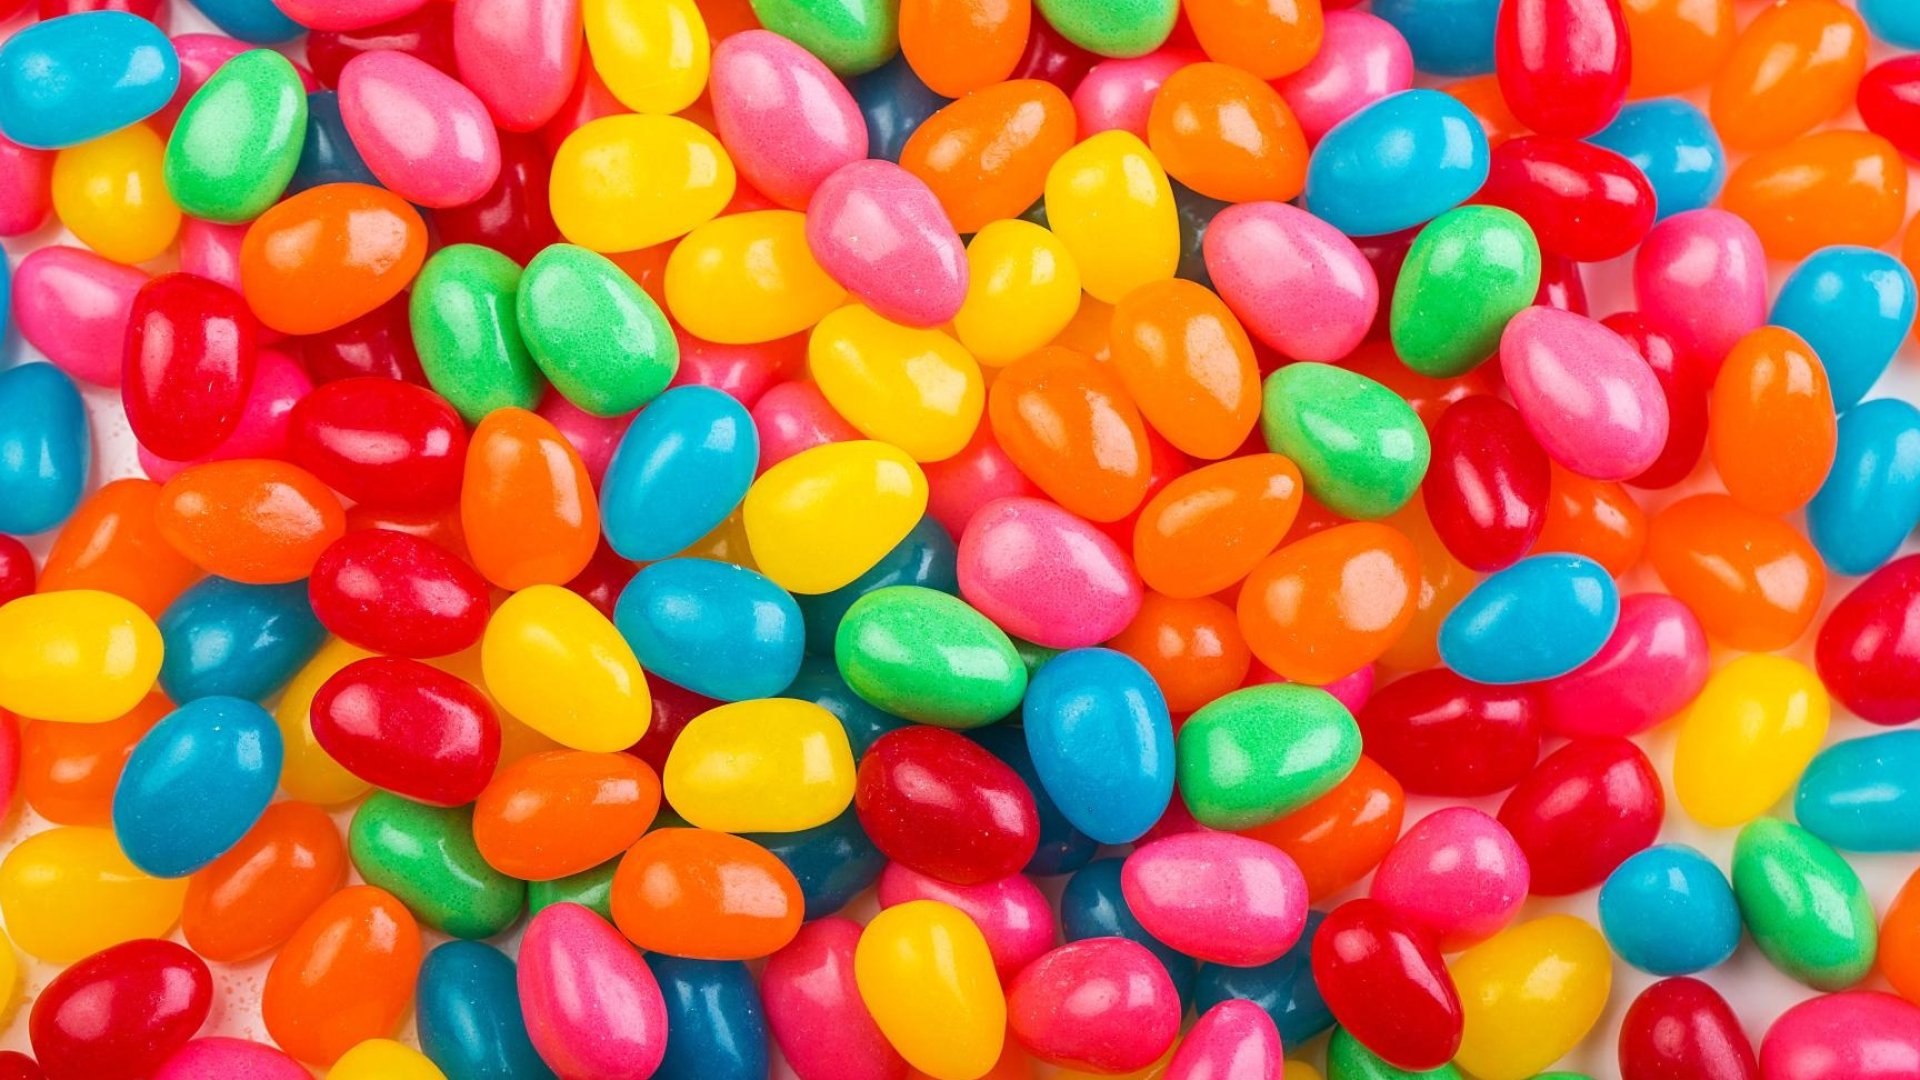 Mouthwatering jelly beans, Vibrant colors, Sugary delights, Tempting candy, 1920x1080 Full HD Desktop